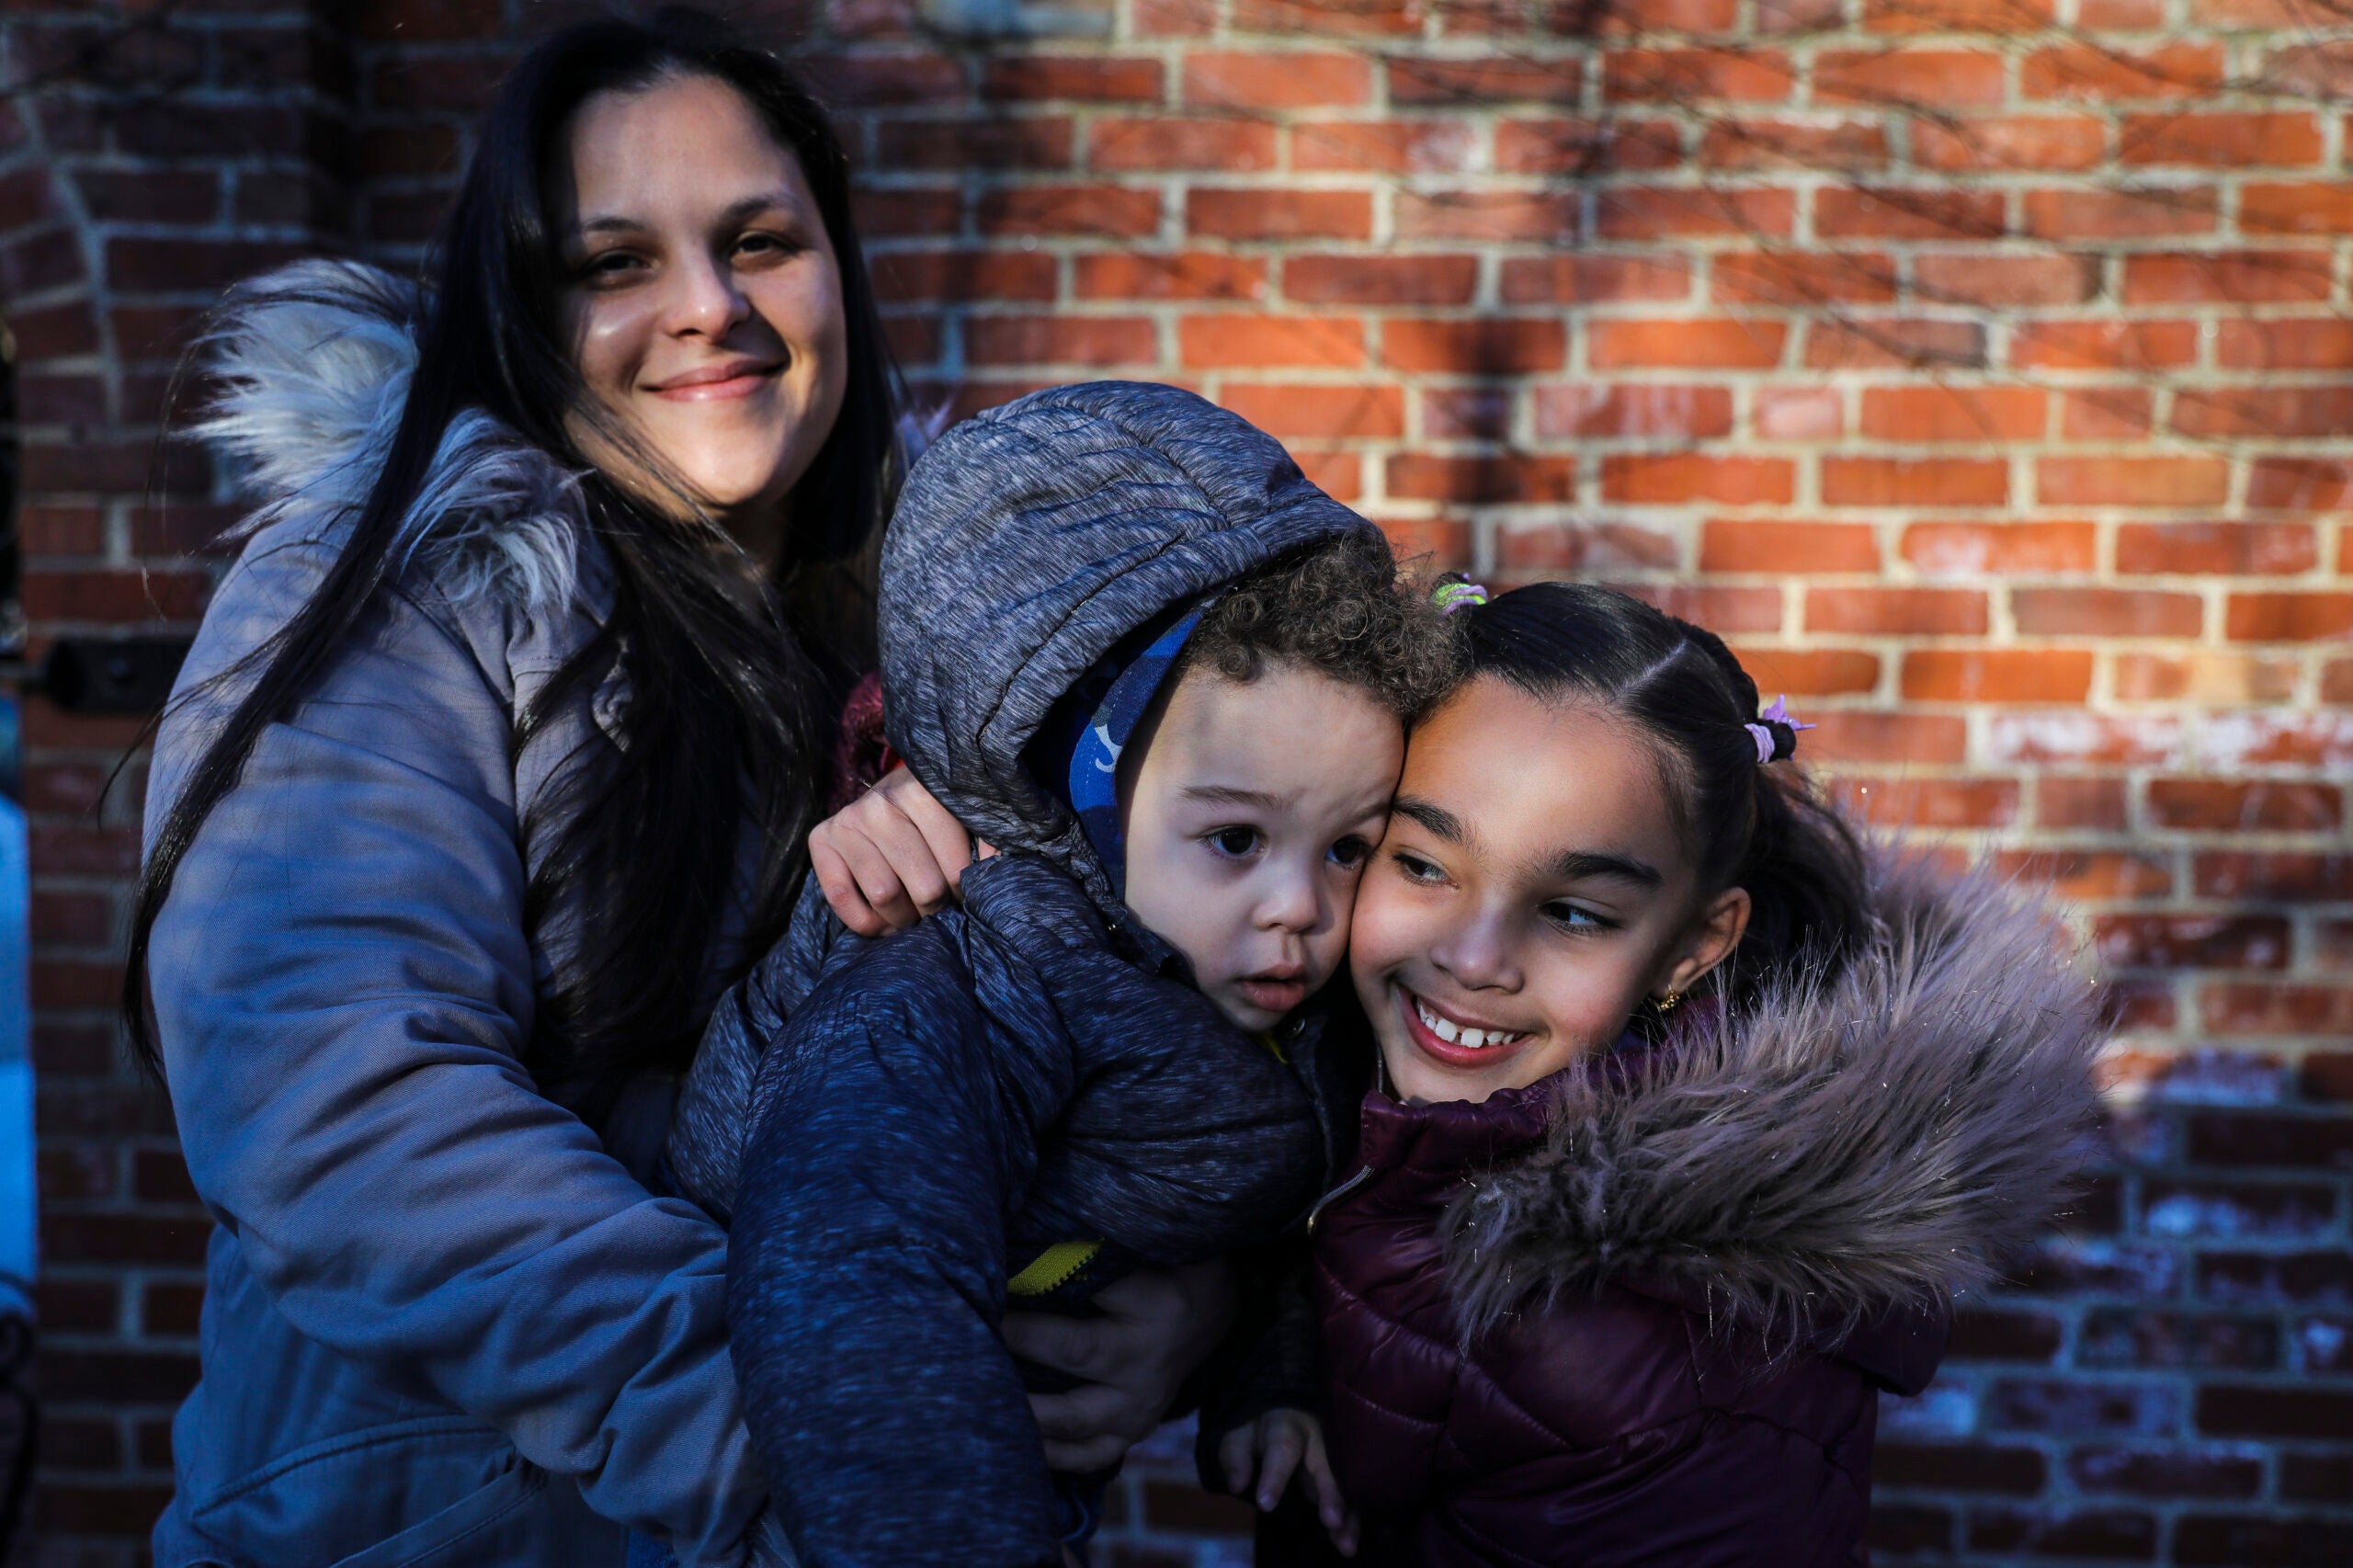 Perla Suazo poses for a portrait with her 20-month-old son Liam Suazo and 7-year-old daughter Atziri Suazo in the courtyard of United South End Settlements on Friday. Suazo is part of a guaranteed income program run by United South End Settlements. Since October, over a dozen low-income families were being given no-strings attached money ($800 a month) for 18 months.